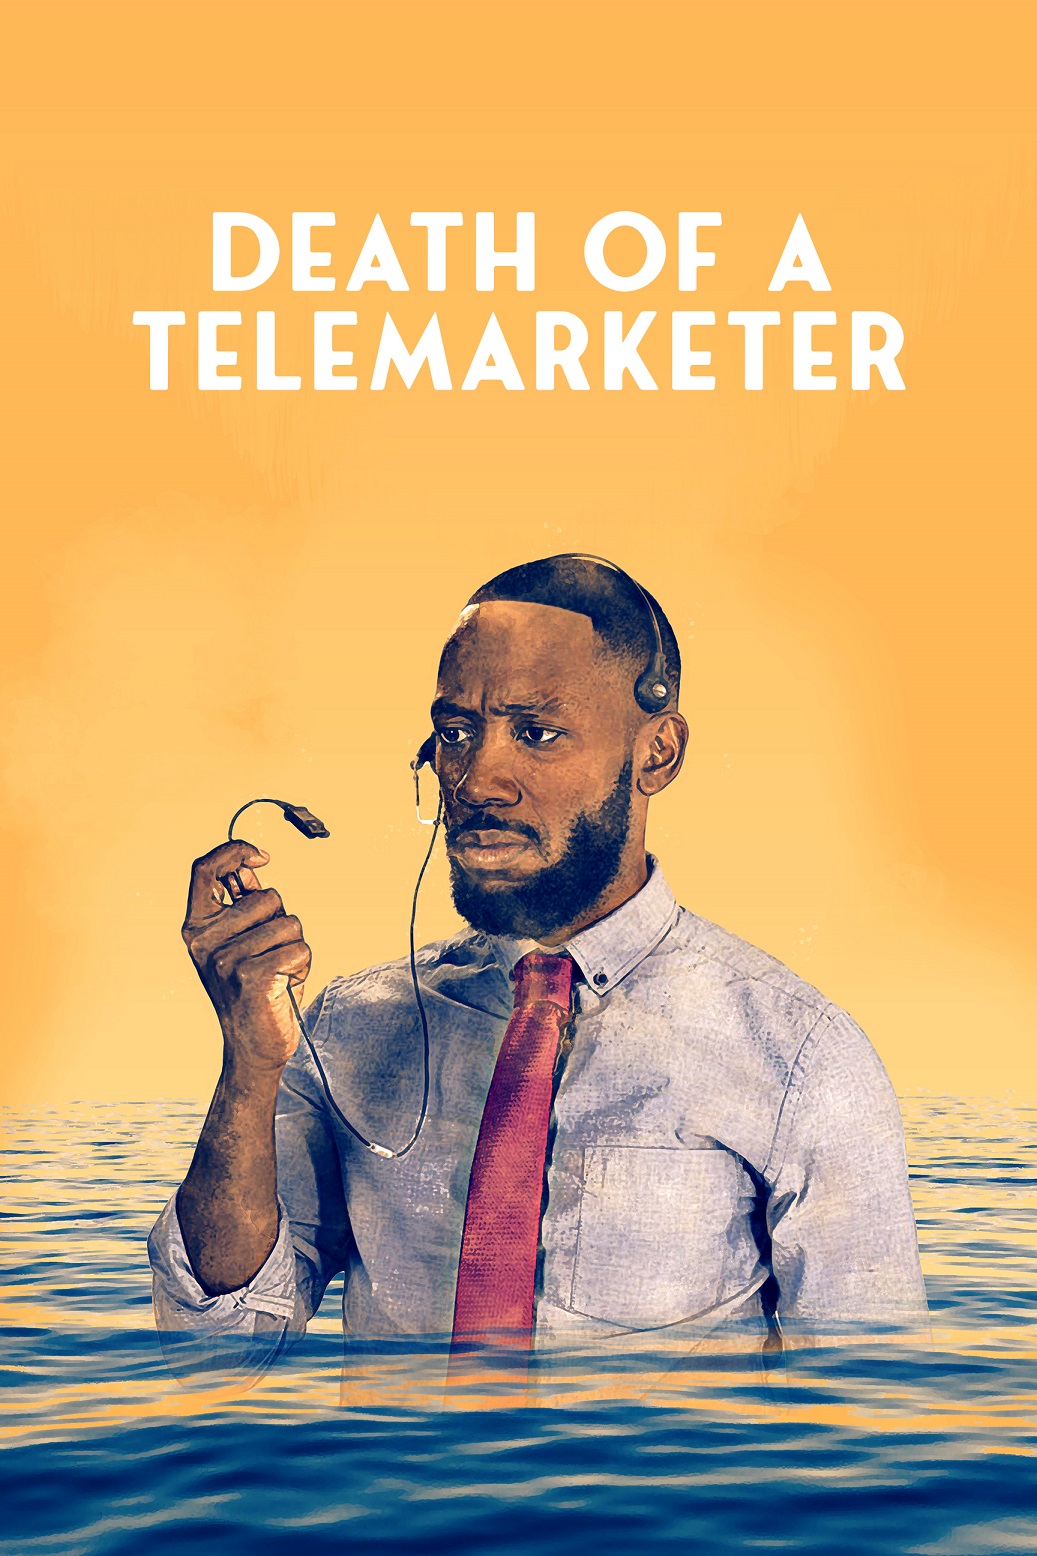 Death of a Telemarketer Trailer & Poster 2